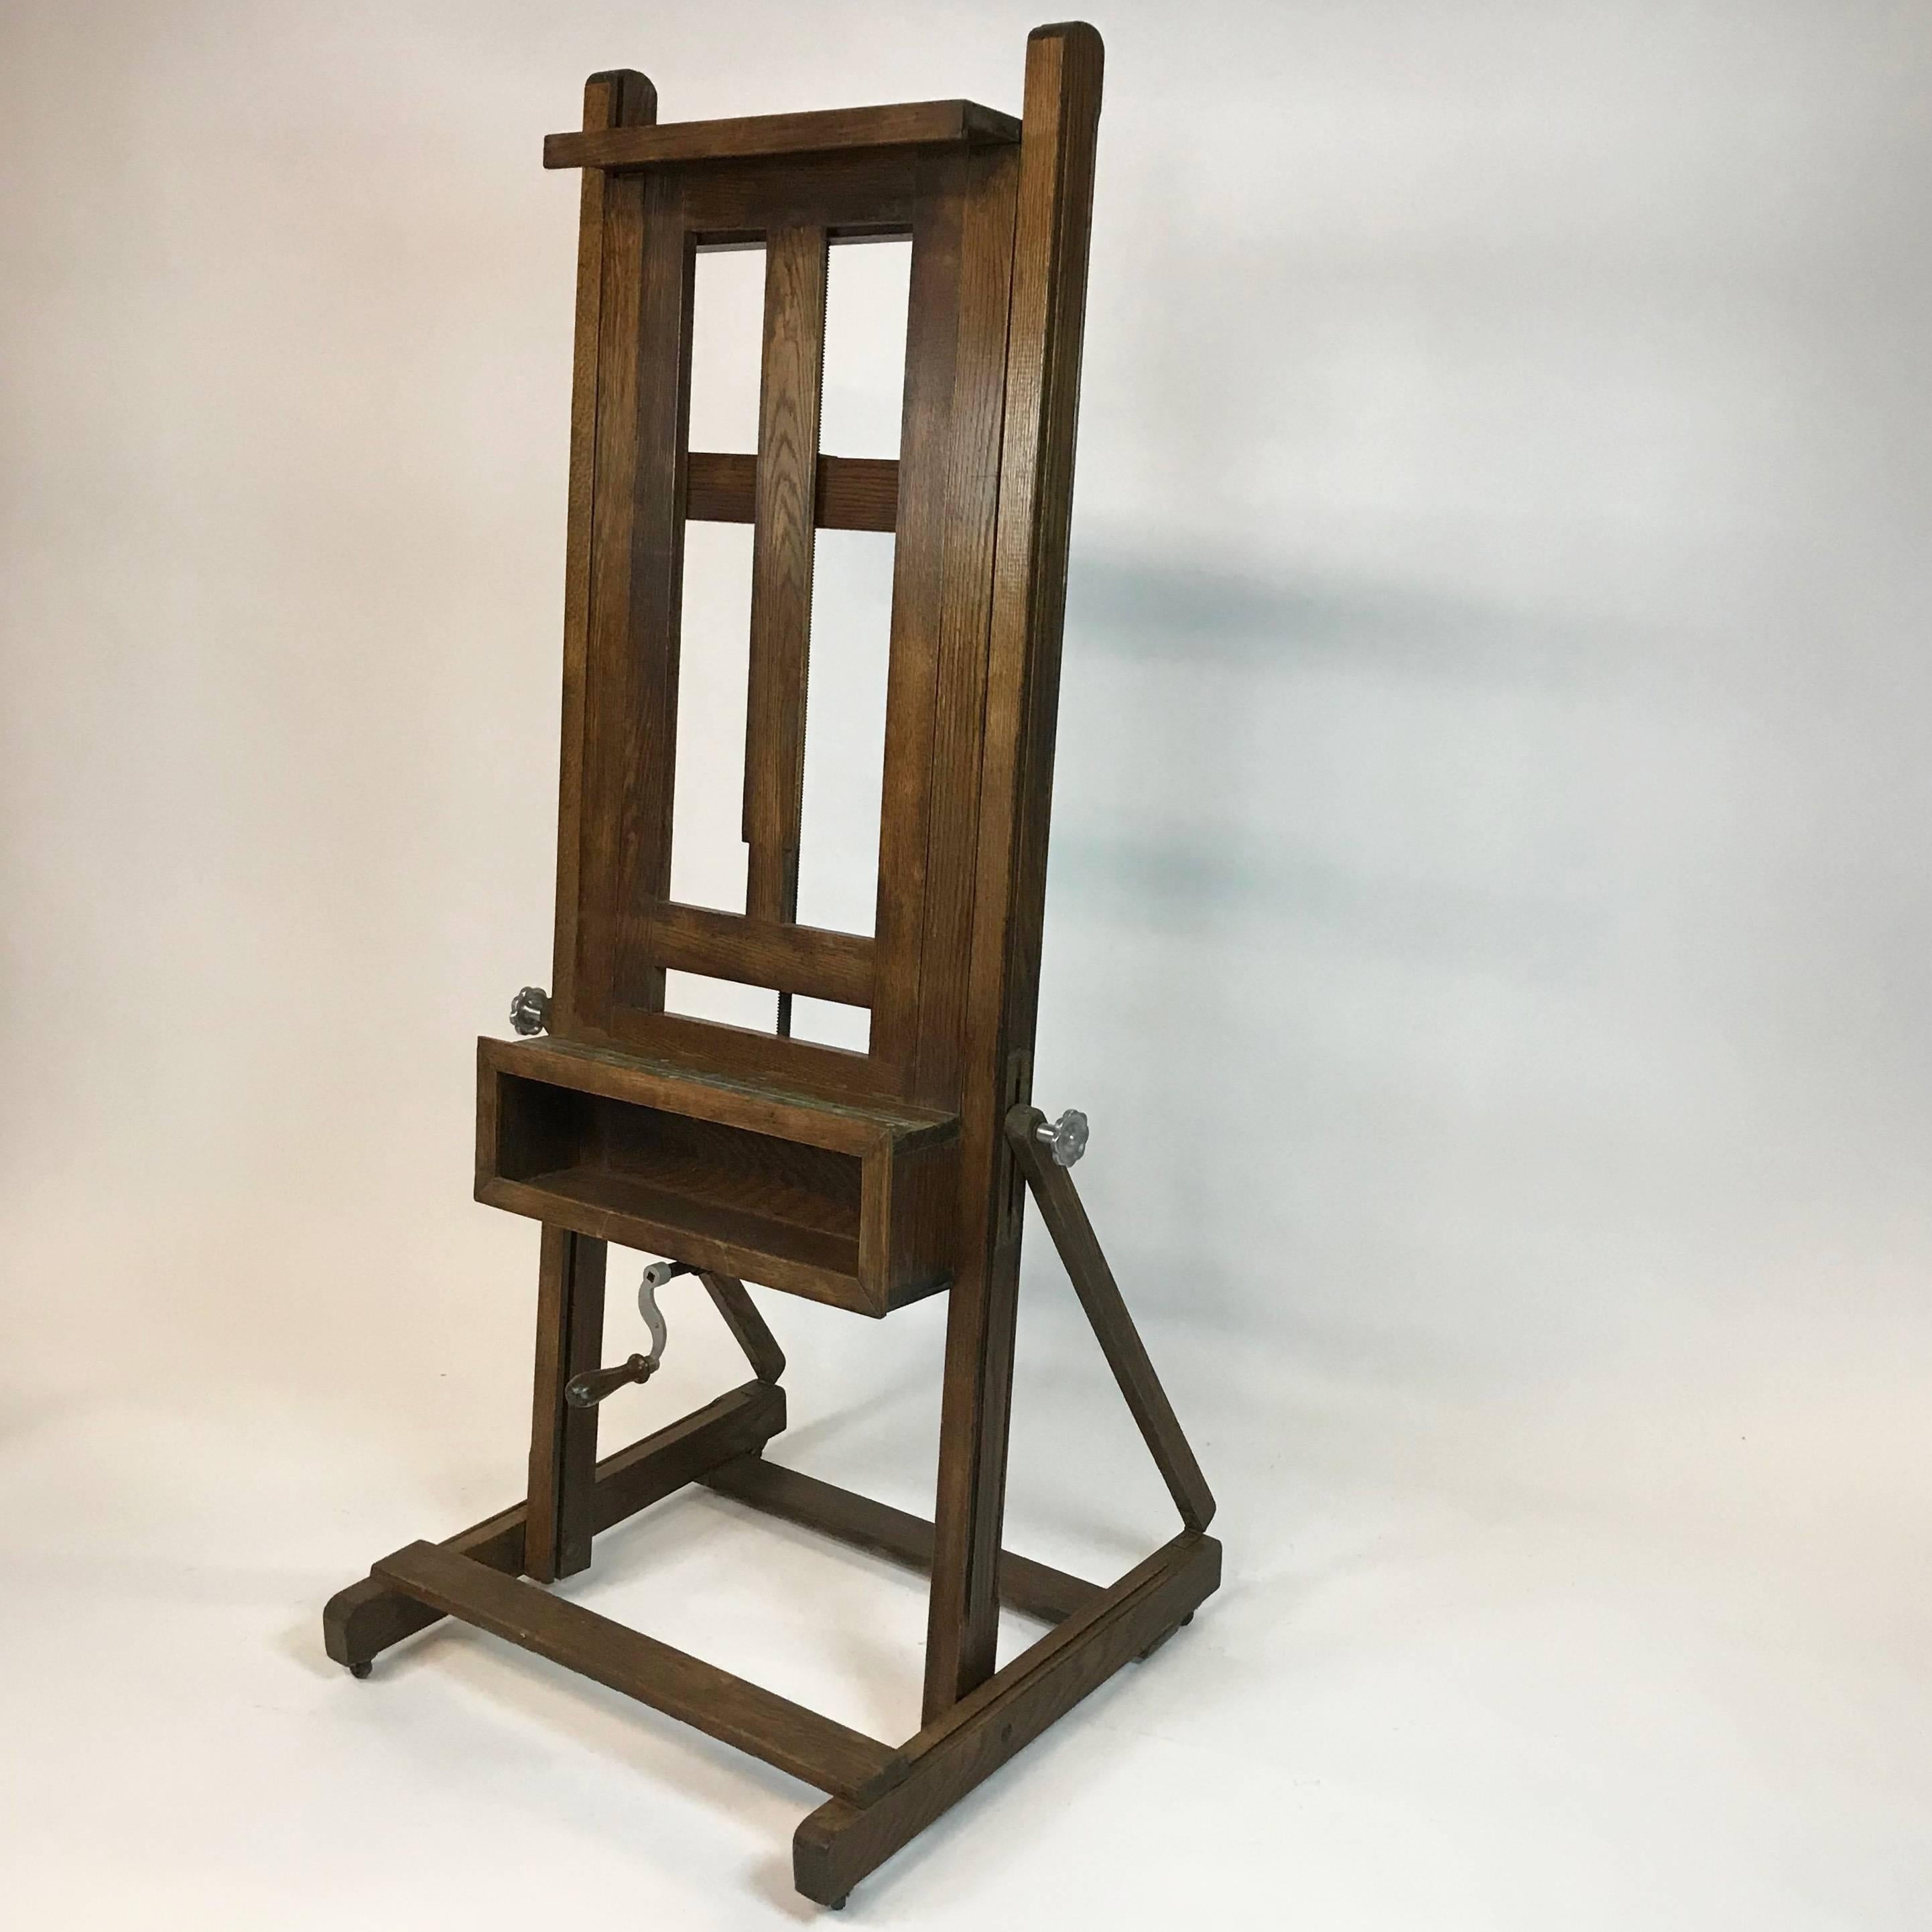 Large format, oak, full frame, fully adjustable, studio artists easel raised up on a trestle base with all original hardware The front crank tilts the easel up to 15 degrees from vertical. The easel opens up to fit a frame up to 39 inches wide and